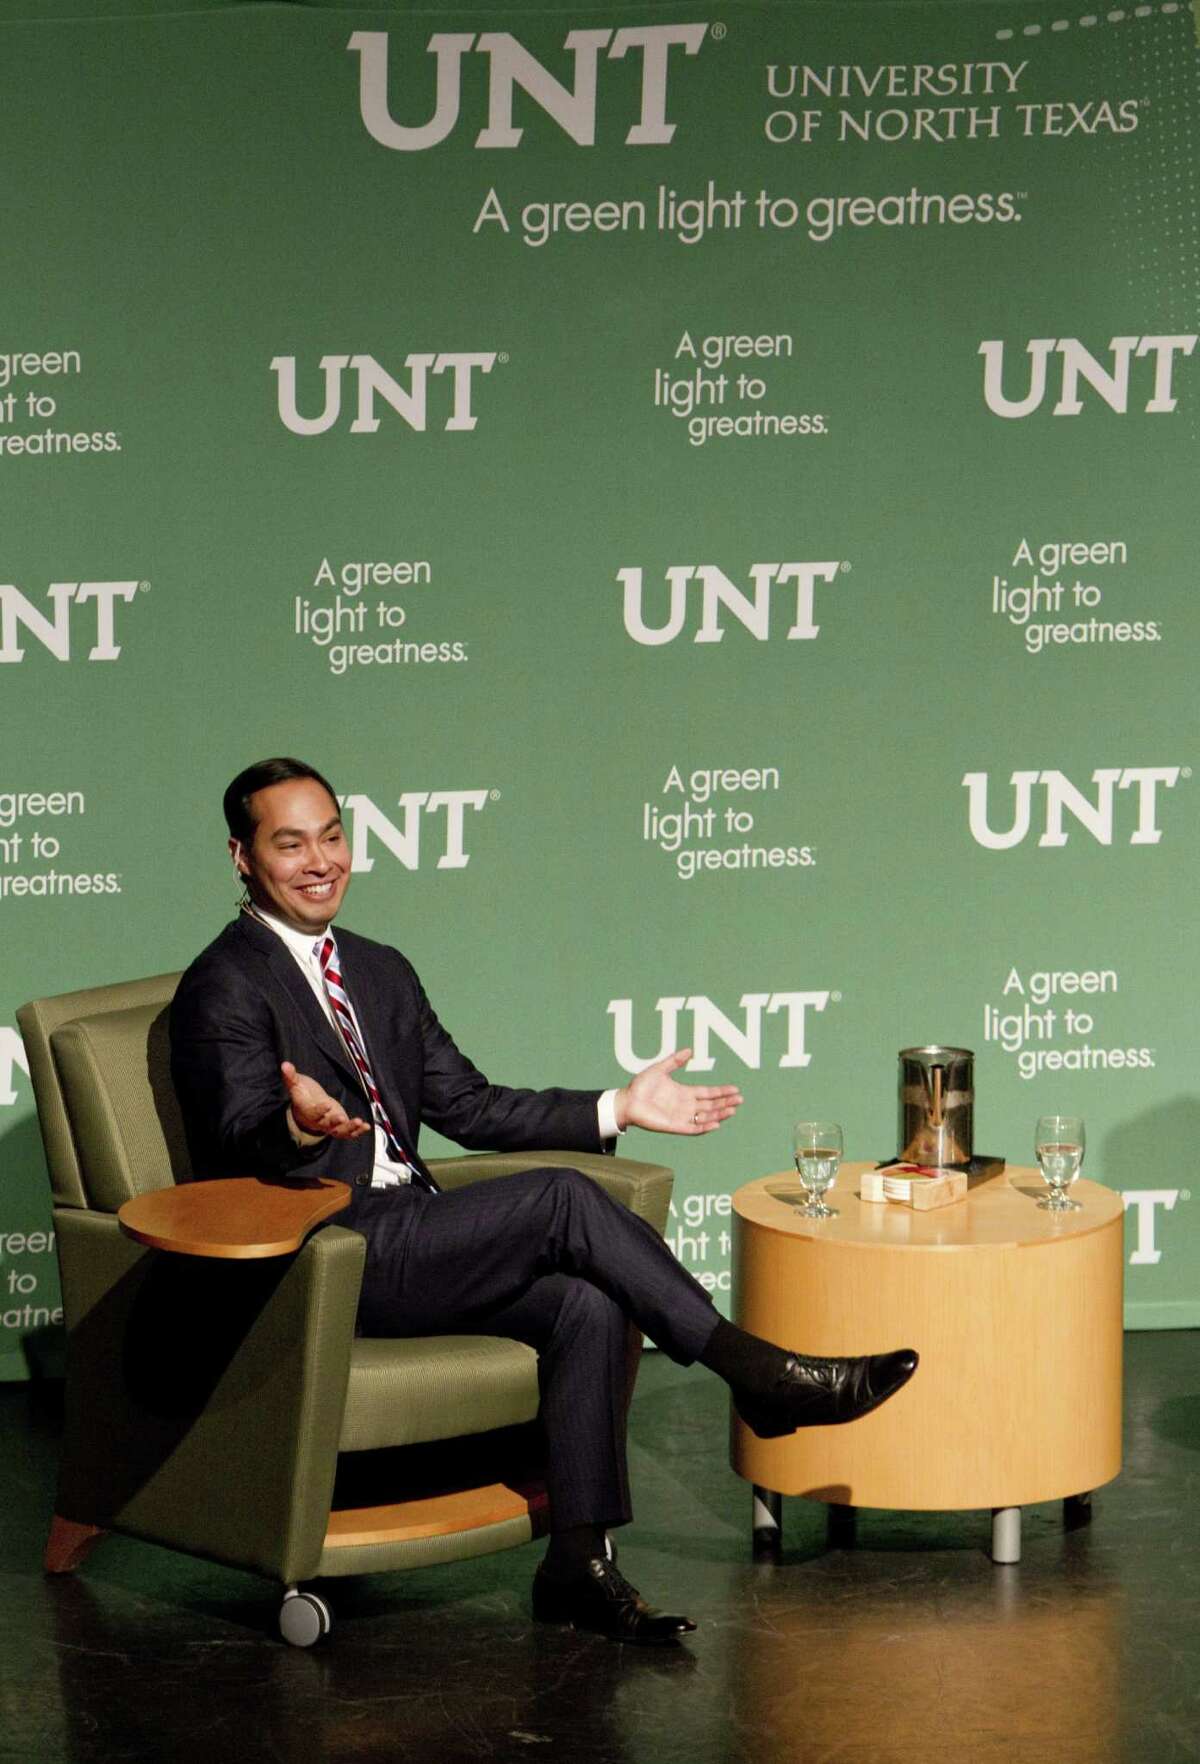 As the political spotlight on him has brightened, Mayor Julián Castro has been making trips like this one to a public forum titled “A Conversation on Political Leadership in the Future of American Politics” at the University of North Texas in Denton.